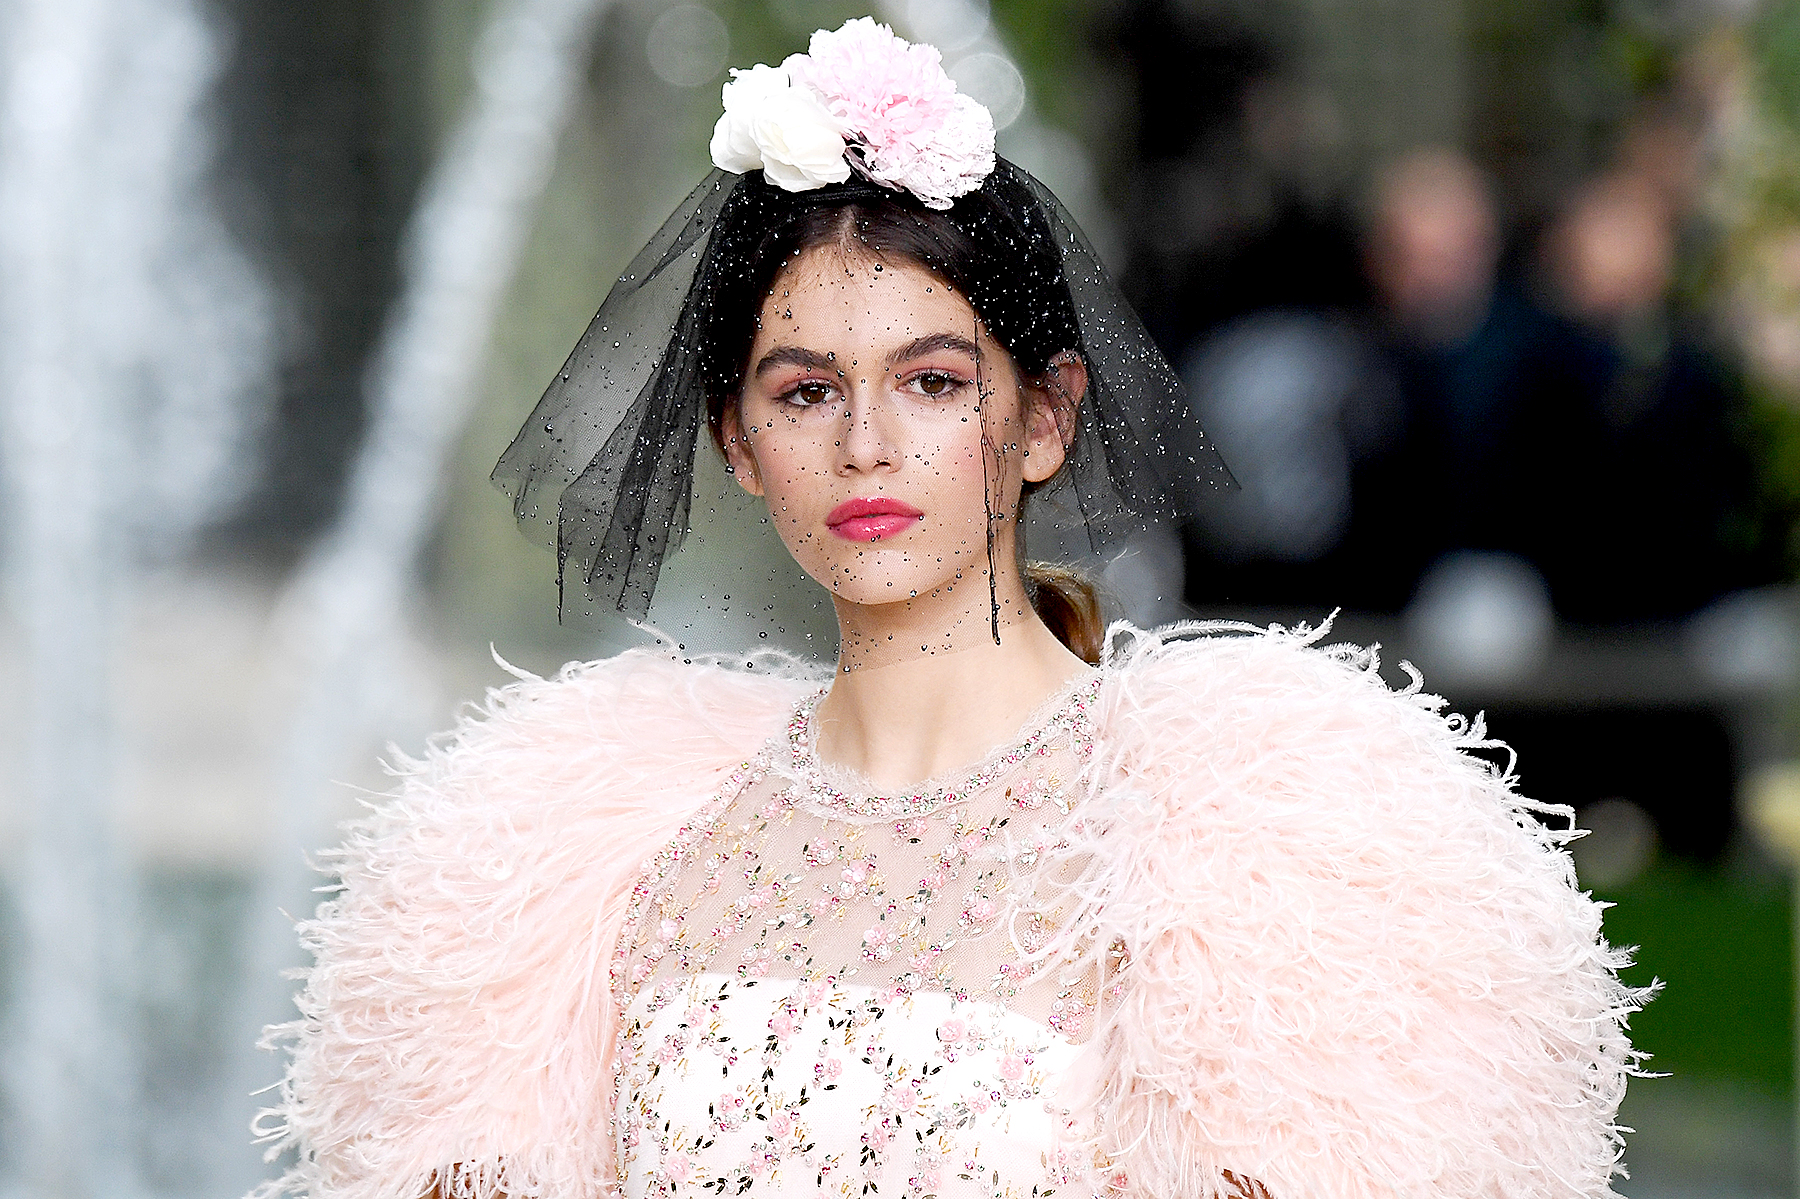 Kaia Gerber Chanel Haute Couture 2018 Runway Hair and Makeup: Details